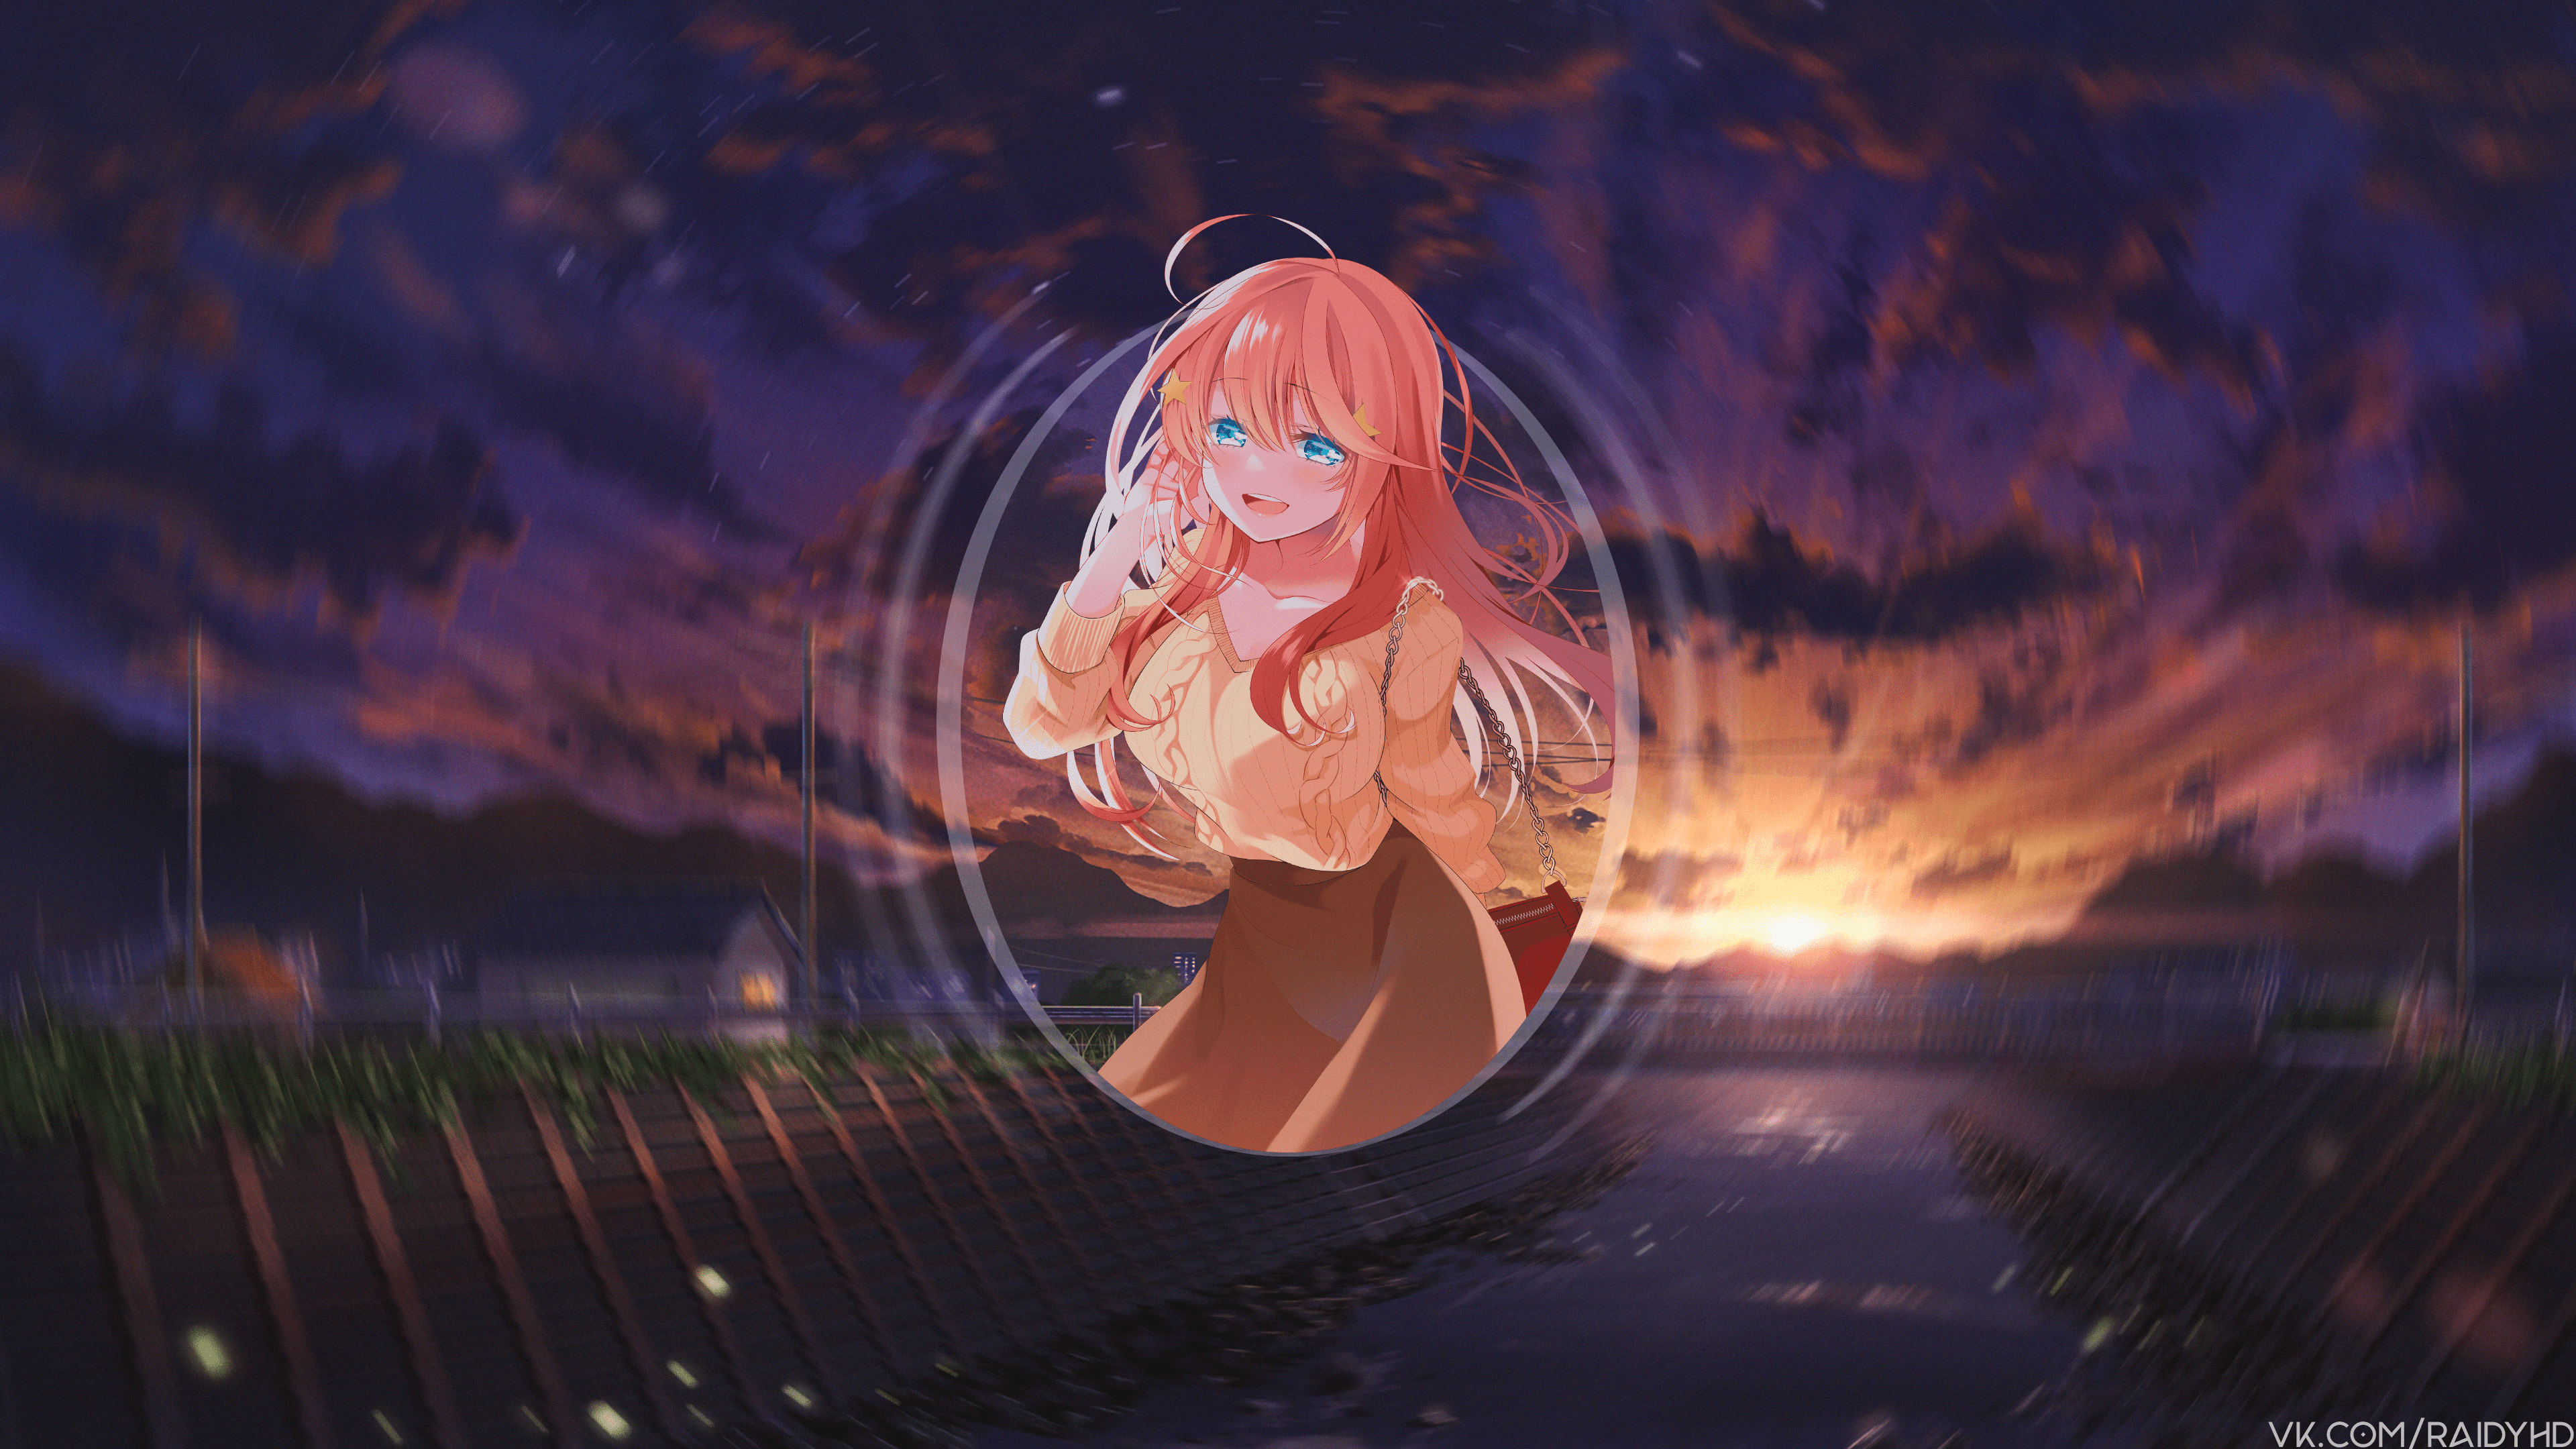 Anime 3840x2160 anime anime girls Nakano Itsuki picture-in-picture redhead blue eyes sky sunlight outdoors long hair open mouth 5-toubun no Hanayome